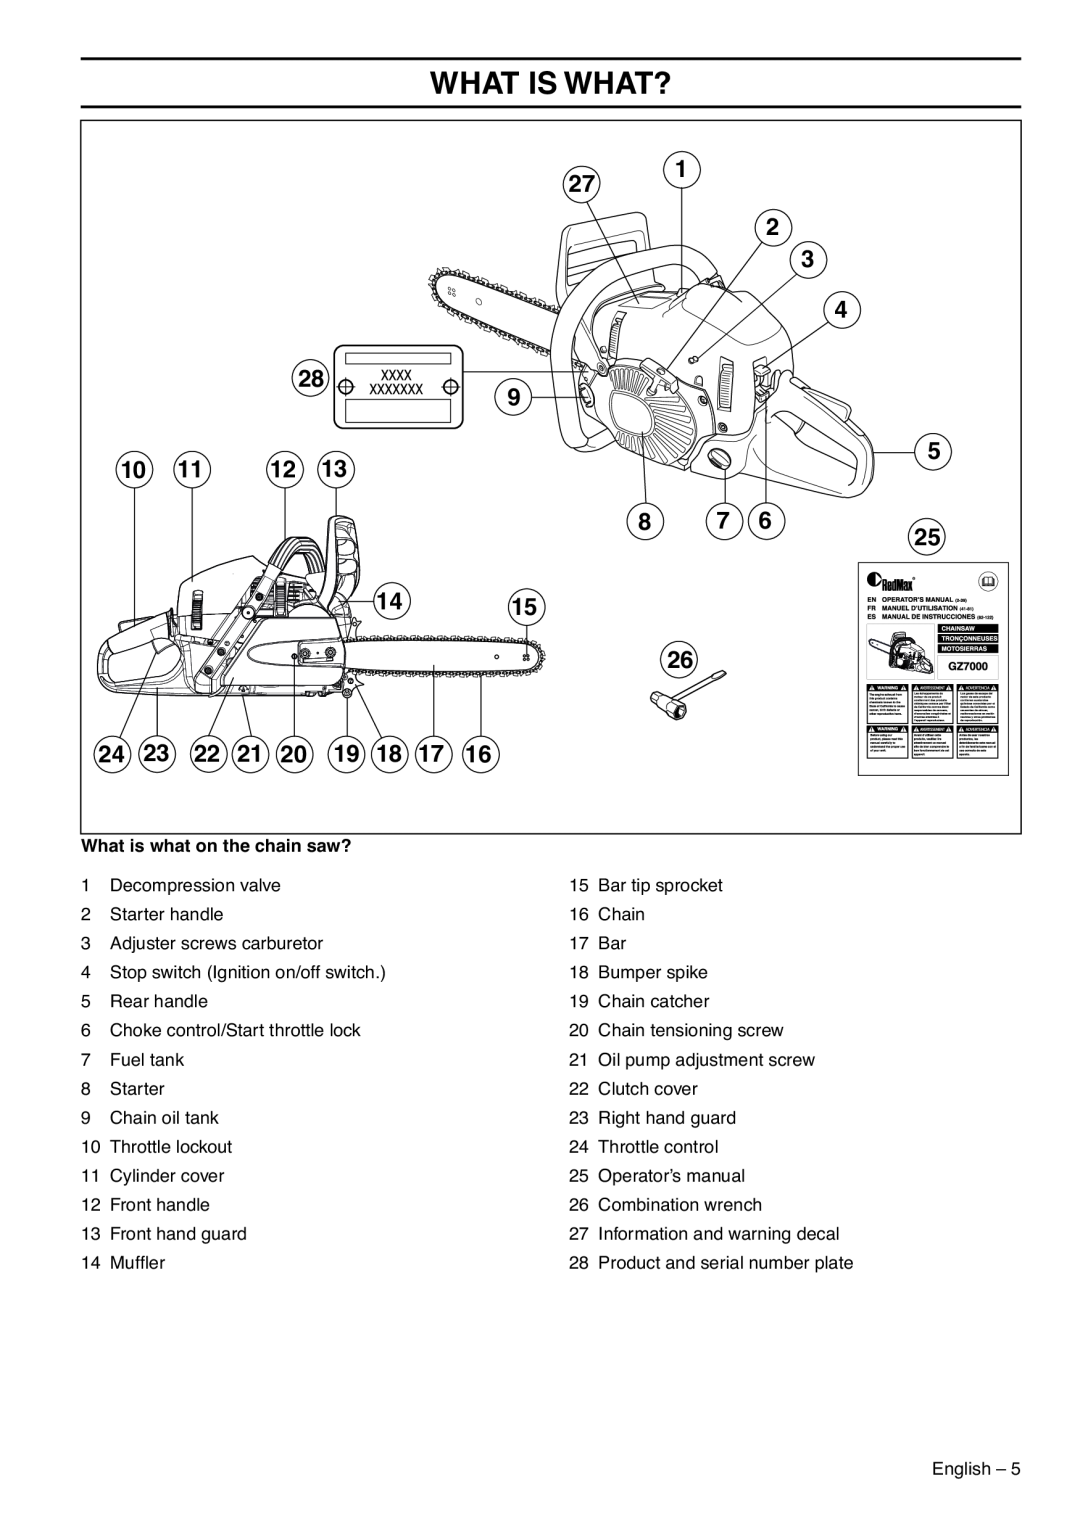 RedMax GZ7000 manual What Is What?, What is what on the chain saw? 